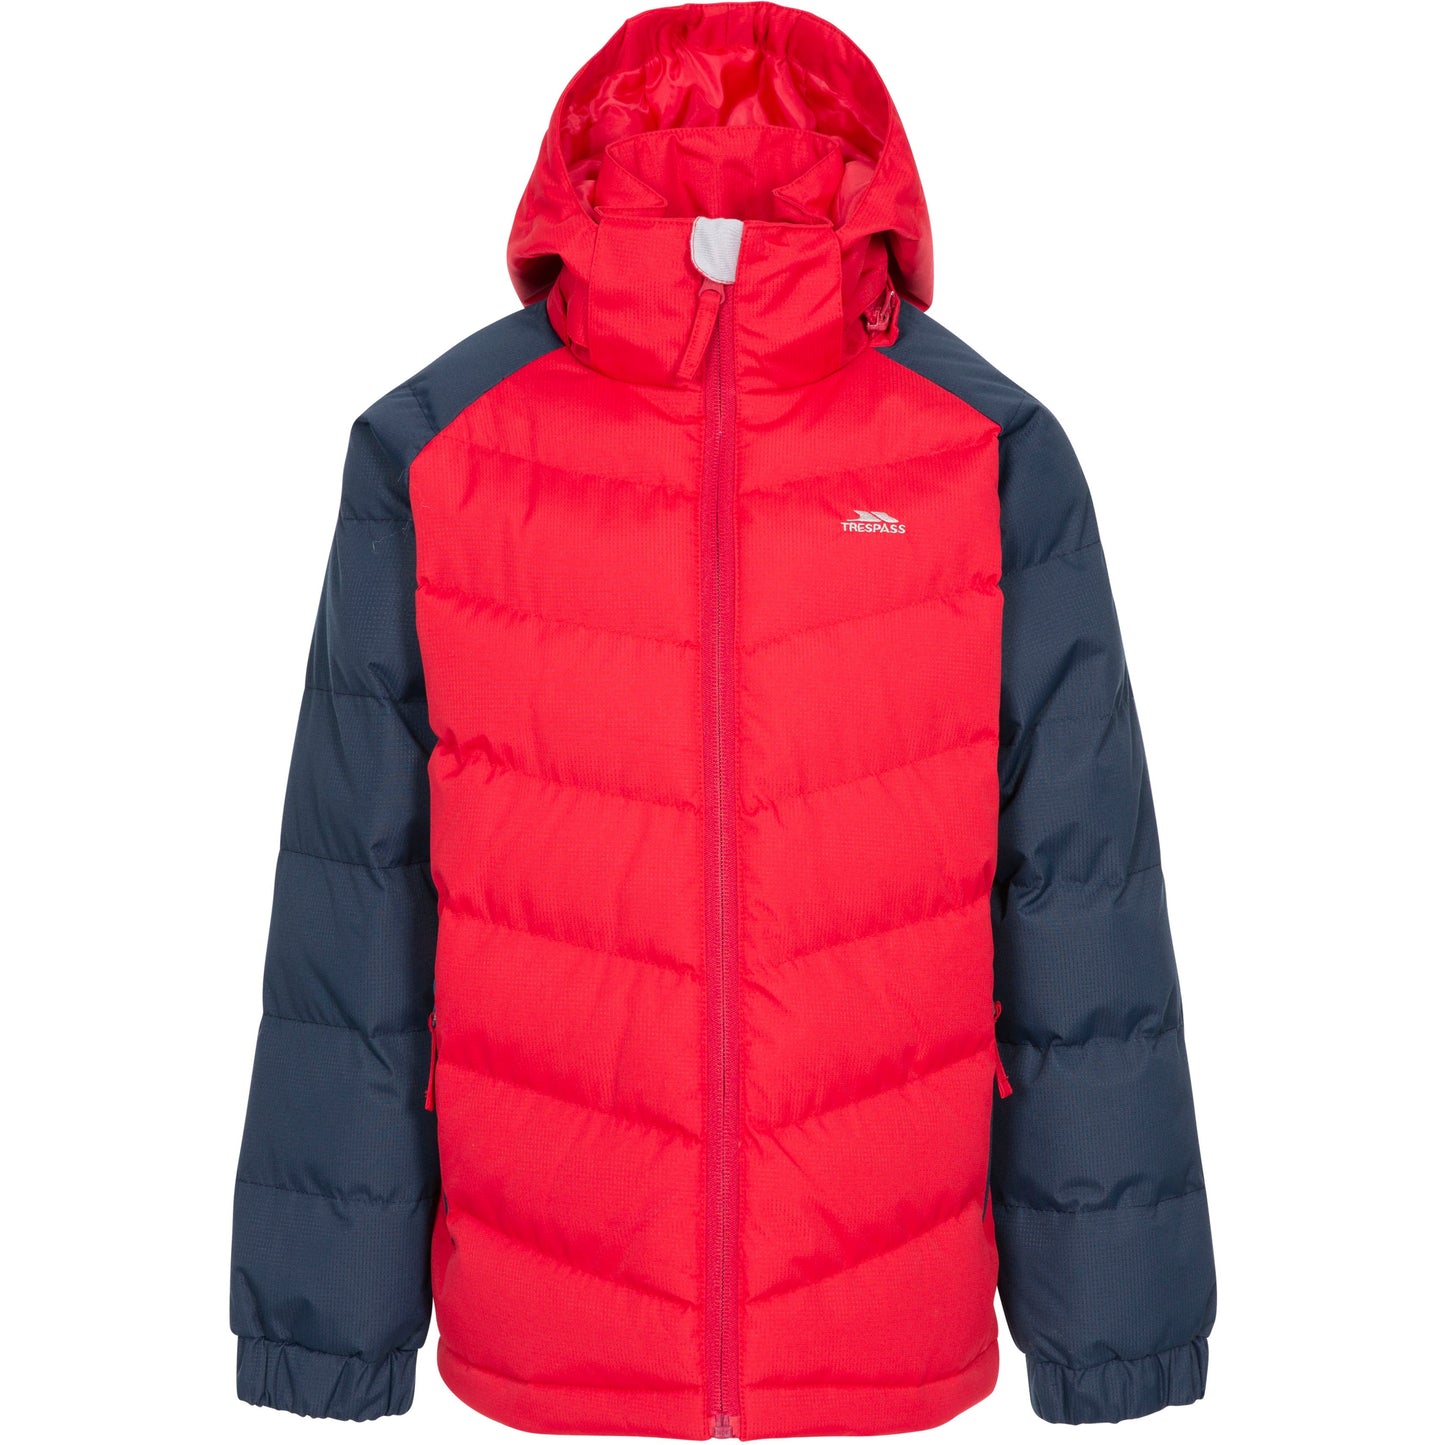 Sidespin Boys' Waterproof Insulated Padded Jacket in Red